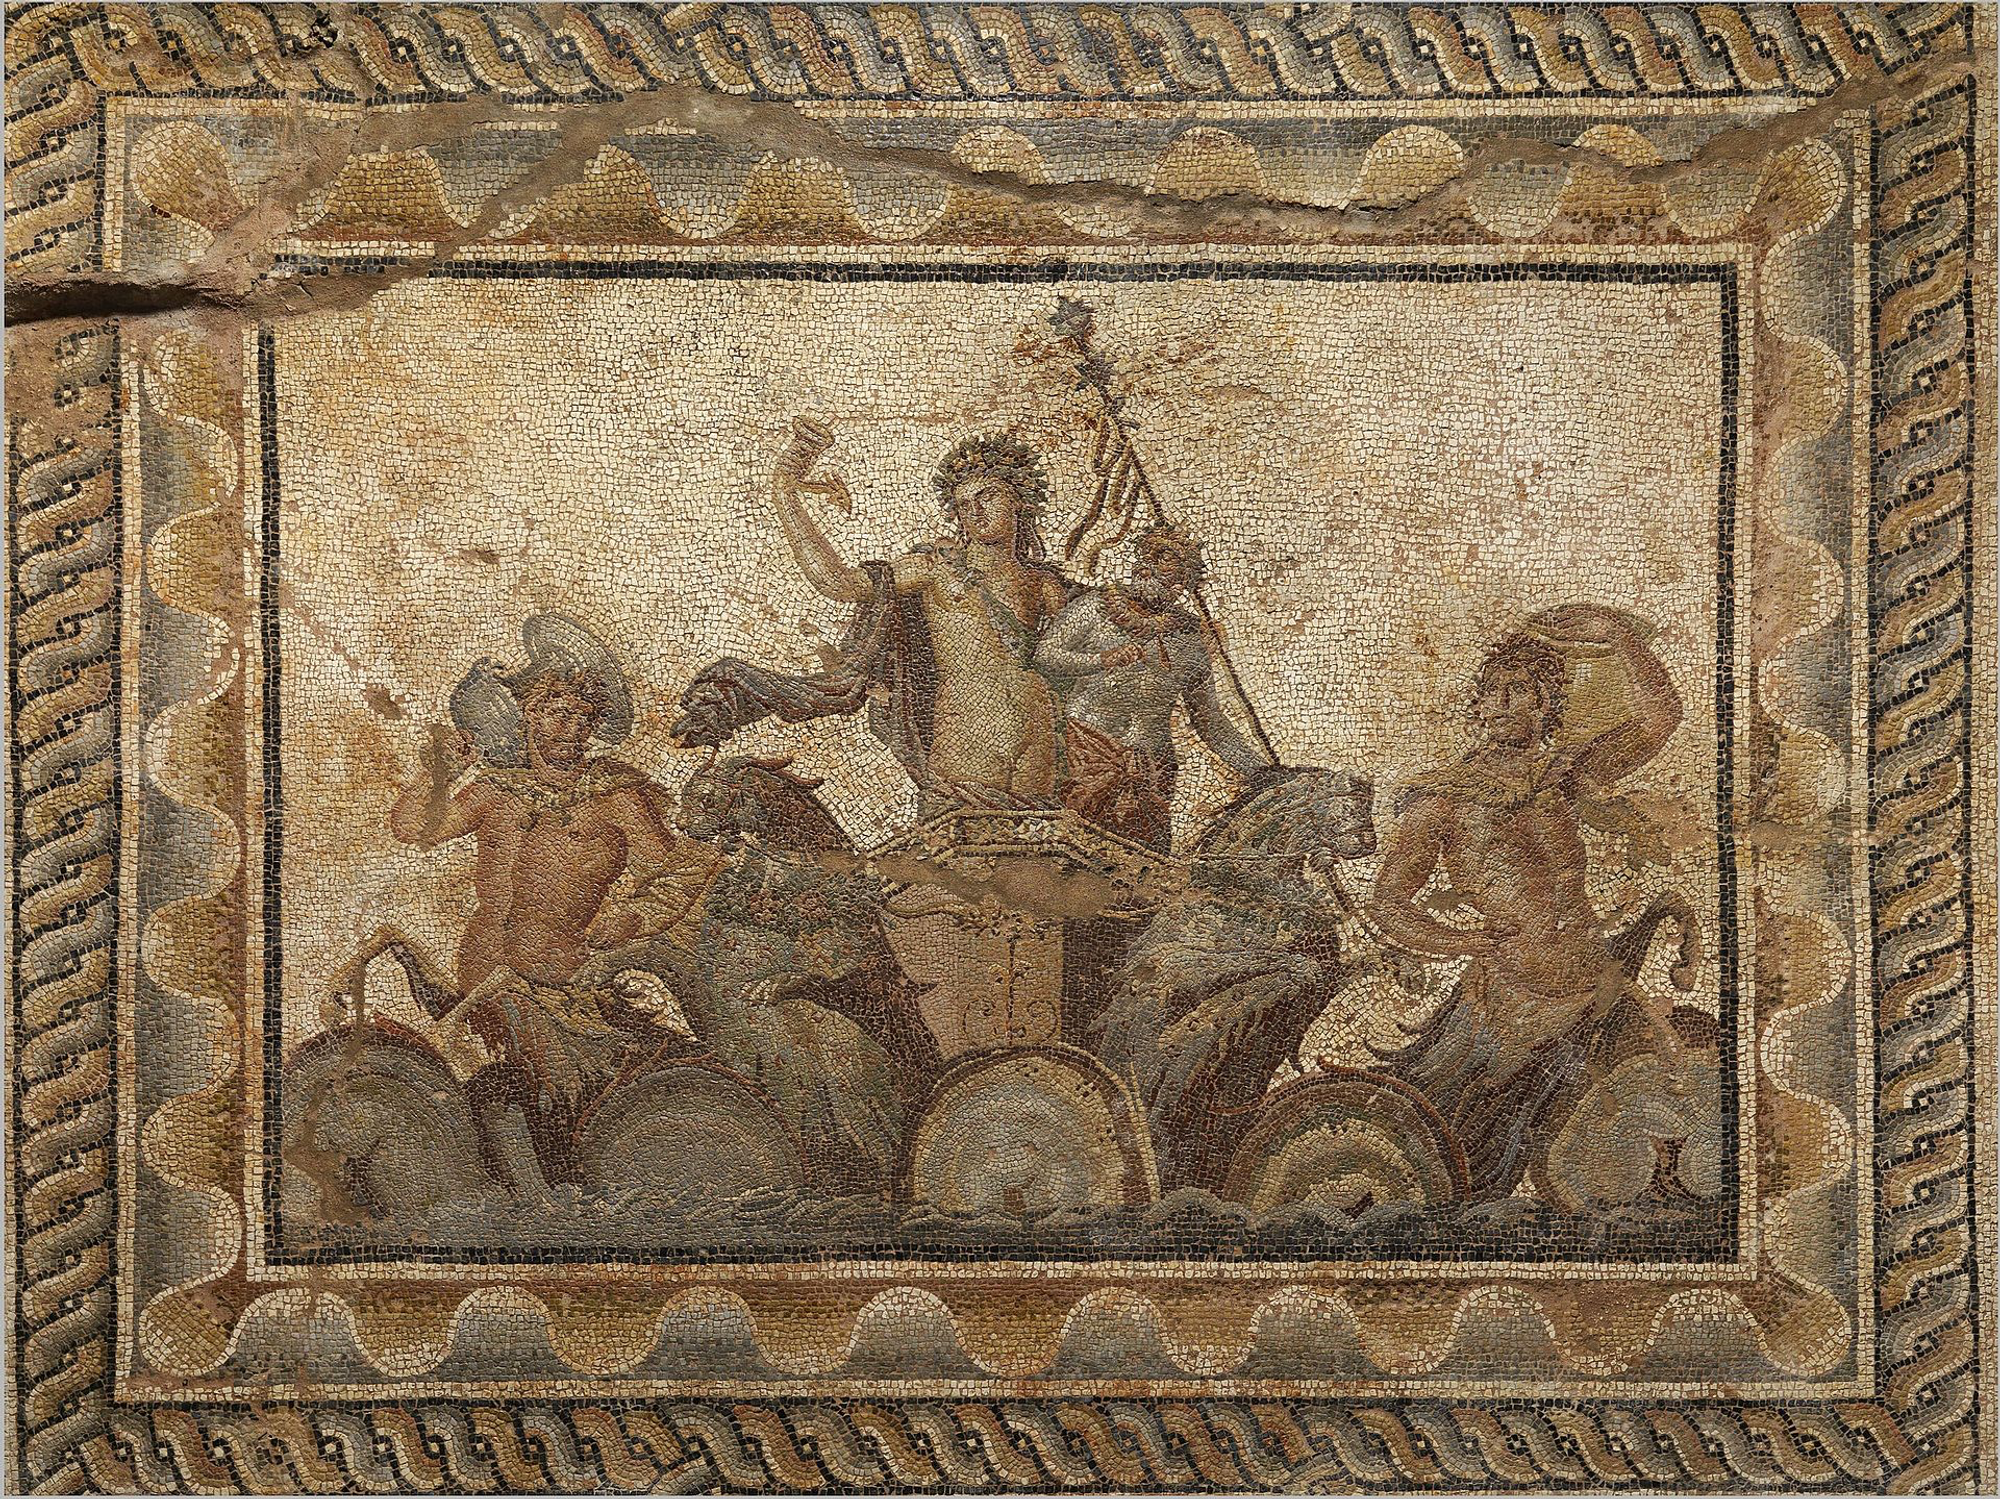 Dionysus, the Greek god of madness (among other things): from the Villa of Dionysus (second century AD) in Dion, Greece. Image from Wikimedia Commons.